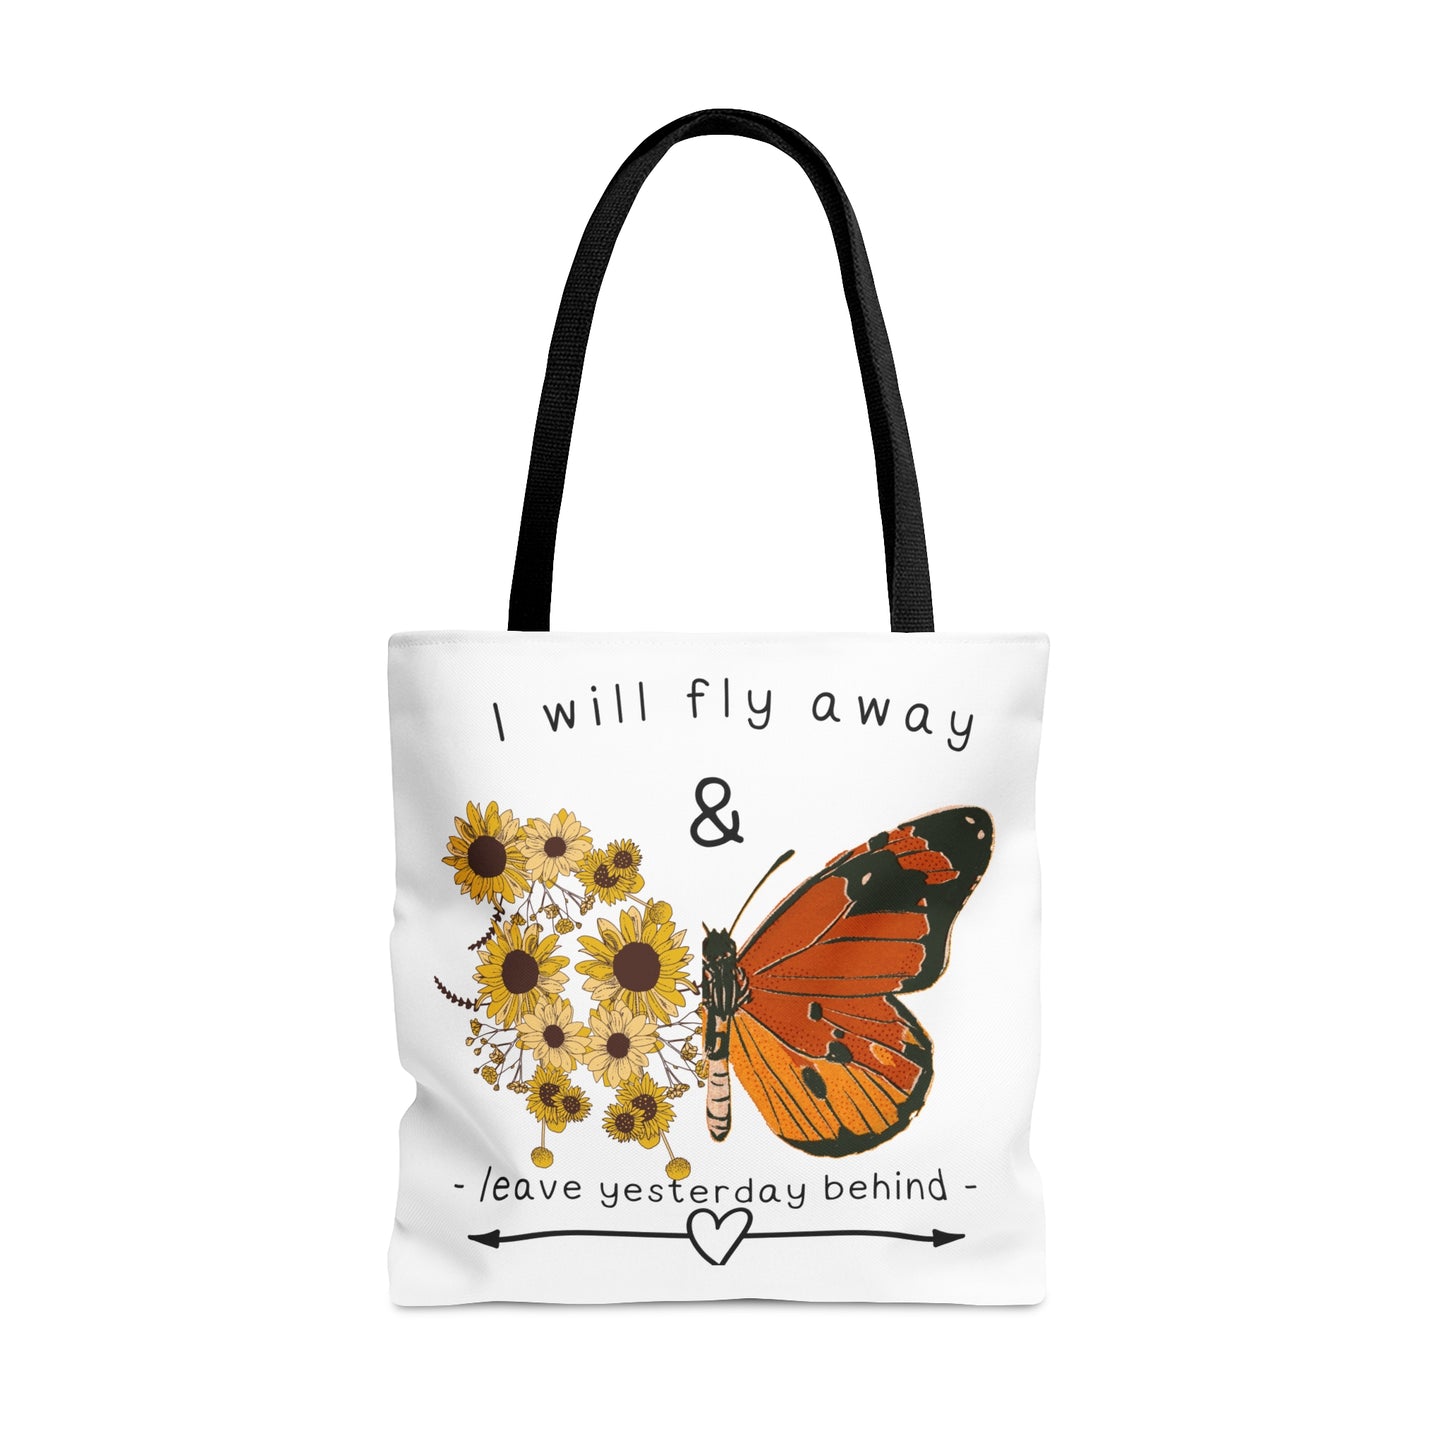 Beautiful “I will fly away & leave yesterday behind” inspirational Tote Bag in 3 sizes to meet your needs.